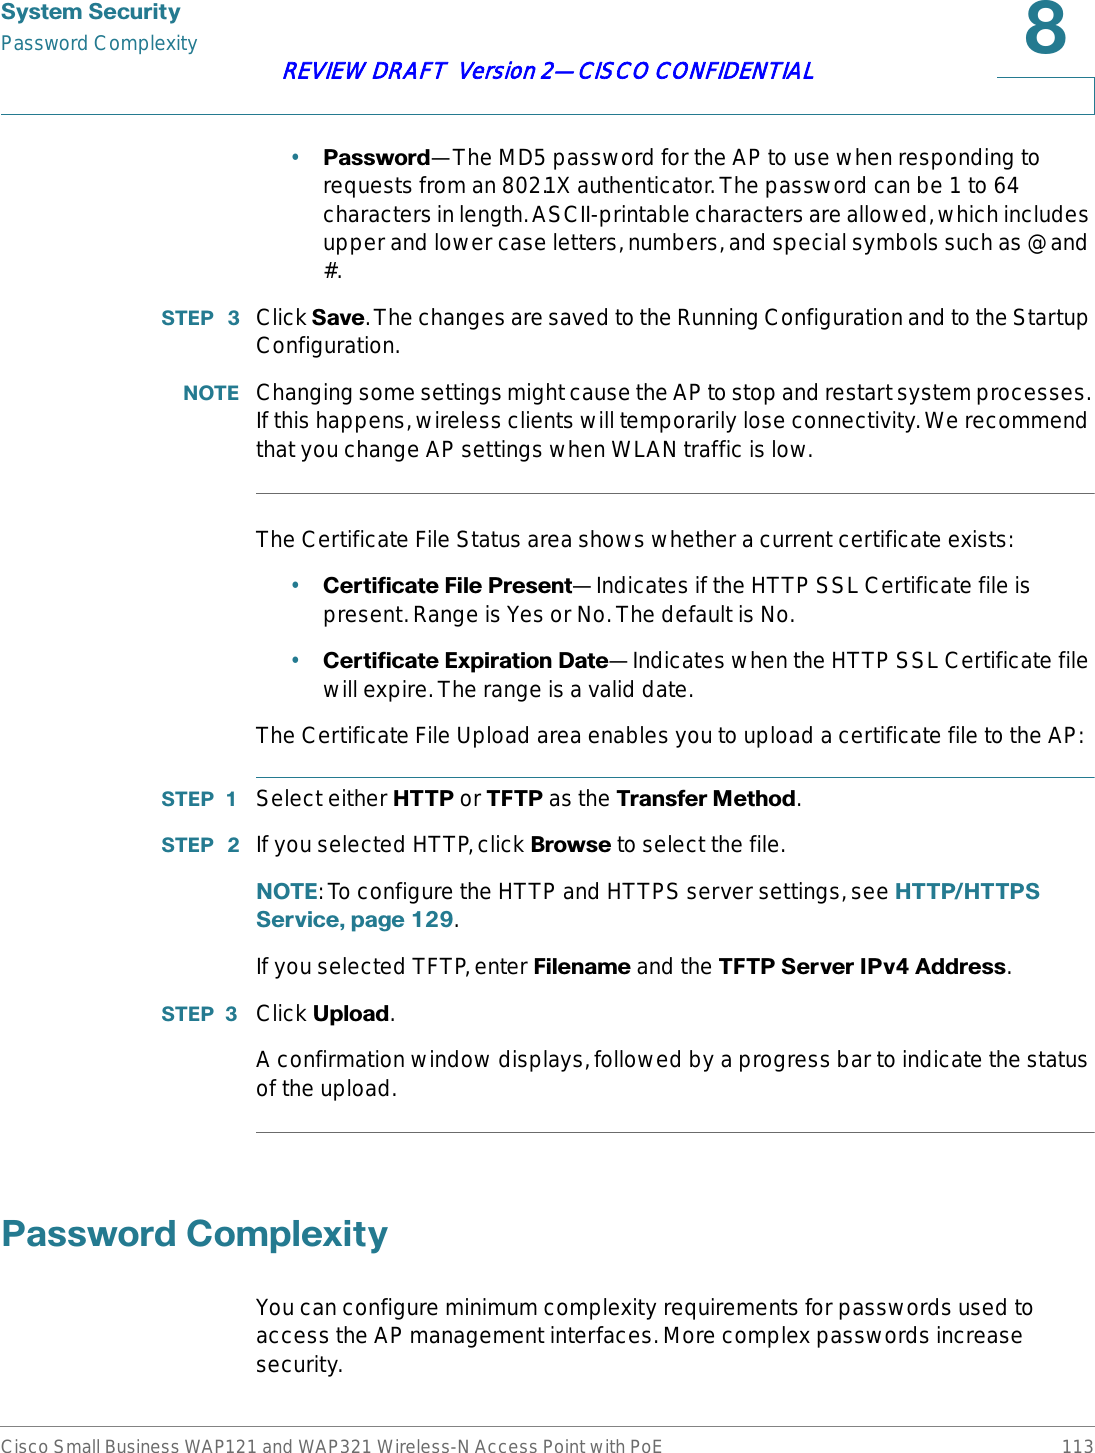 6\VWHP6HFXULW\Password ComplexityCisco Small Business WAP121 and WAP321 Wireless-N Access Point with PoE 113REVIEW DRAFT  Version 2—CISCO CONFIDENTIAL•3DVVZRUG—The MD5 password for the AP to use when responding to requests from an 802.1X authenticator. The password can be 1 to 64 characters in length. ASCII-printable characters are allowed, which includes upper and lower case letters, numbers, and special symbols such as @ and #.67(3  Click 6DYH. The changes are saved to the Running Configuration and to the Startup Configuration.127( Changing some settings might cause the AP to stop and restart system processes. If this happens, wireless clients will temporarily lose connectivity. We recommend that you change AP settings when WLAN traffic is low.The Certificate File Status area shows whether a current certificate exists:•&amp;HUWLILFDWH)LOH3UHVHQW—Indicates if the HTTP SSL Certificate file is present. Range is Yes or No. The default is No.•&amp;HUWLILFDWH([SLUDWLRQ&apos;DWH—Indicates when the HTTP SSL Certificate file will expire. The range is a valid date.The Certificate File Upload area enables you to upload a certificate file to the AP:67(3  Select either +773 or 7)73 as the 7UDQVIHU0HWKRG.67(3  If you selected HTTP, click %URZVH to select the file.127(: To configure the HTTP and HTTPS server settings, see +773+77366HUYLFHSDJH.If you selected TFTP, enter )LOHQDPH and the 7)736HUYHU,3Y$GGUHVV.67(3  Click 8SORDG.A confirmation window displays, followed by a progress bar to indicate the status of the upload.3DVVZRUG&amp;RPSOH[LW\You can configure minimum complexity requirements for passwords used to access the AP management interfaces. More complex passwords increase security.